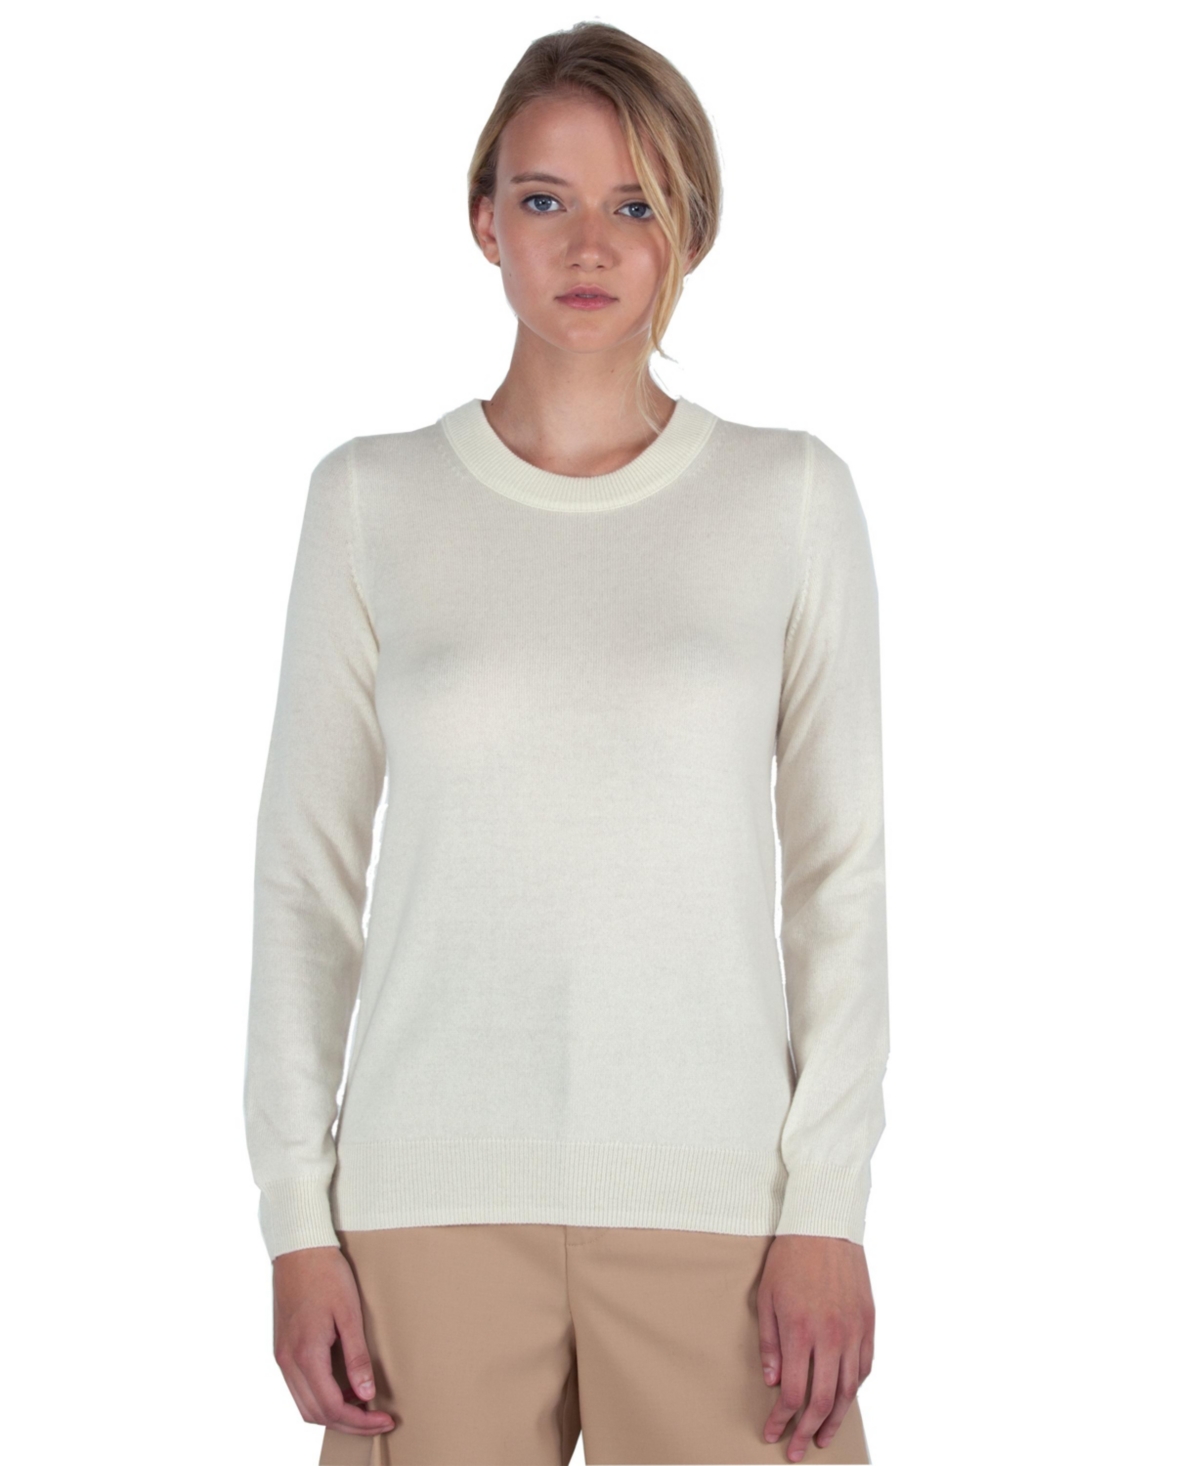 Women's 100% Pure Cashmere Long Sleeve Crew Neck Pullover Sweater - Cream